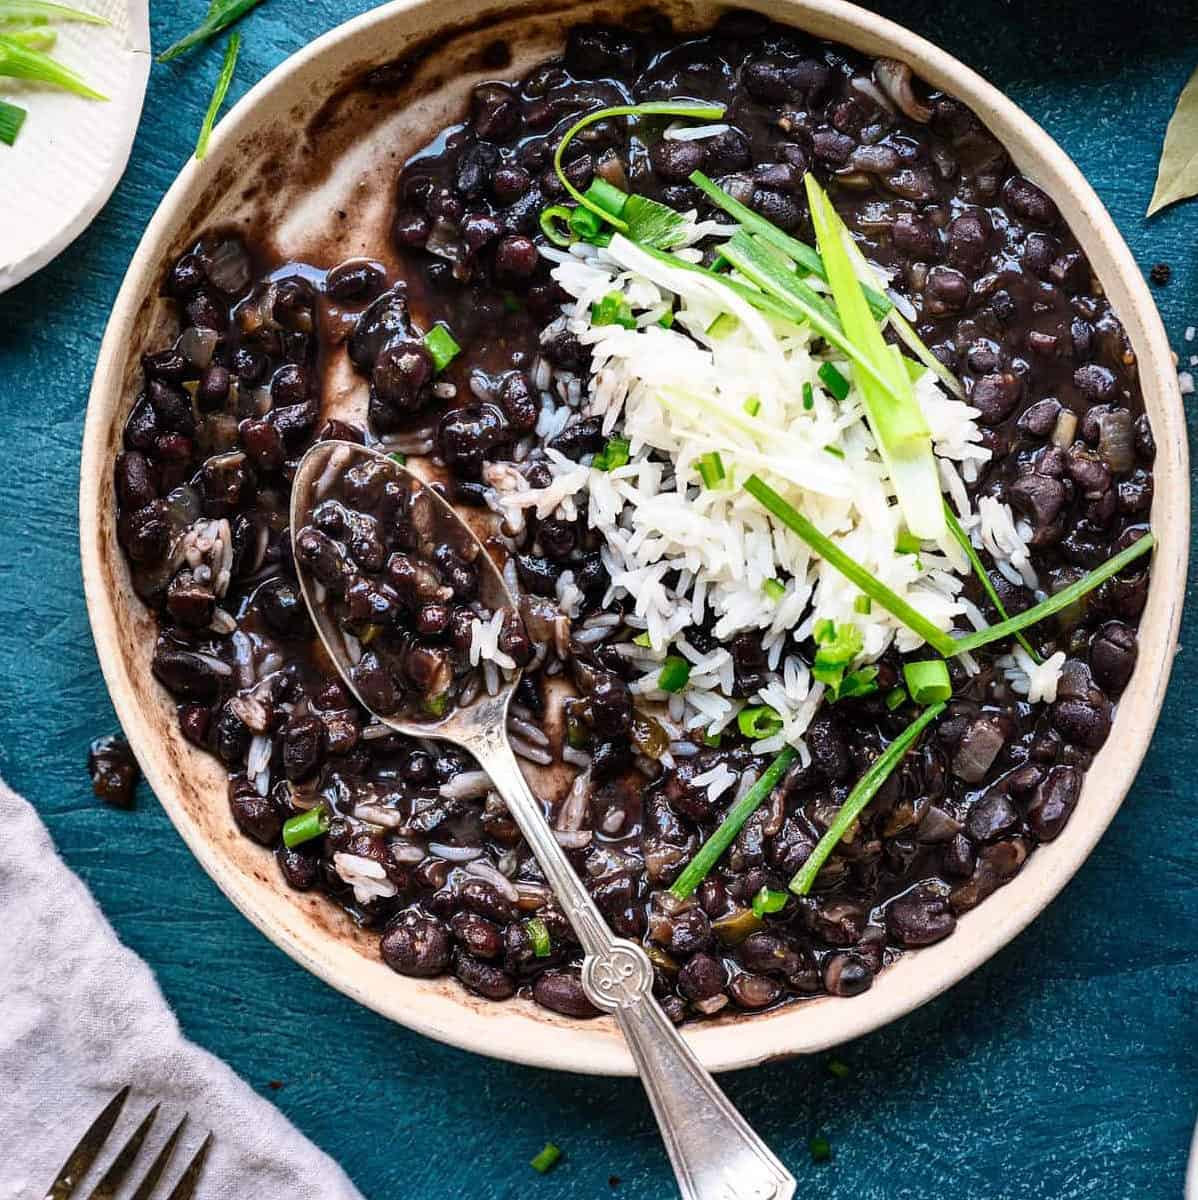  A warm bowl of vegan Cuban black beans, garnished with fresh cilantro and a squeeze of lime.